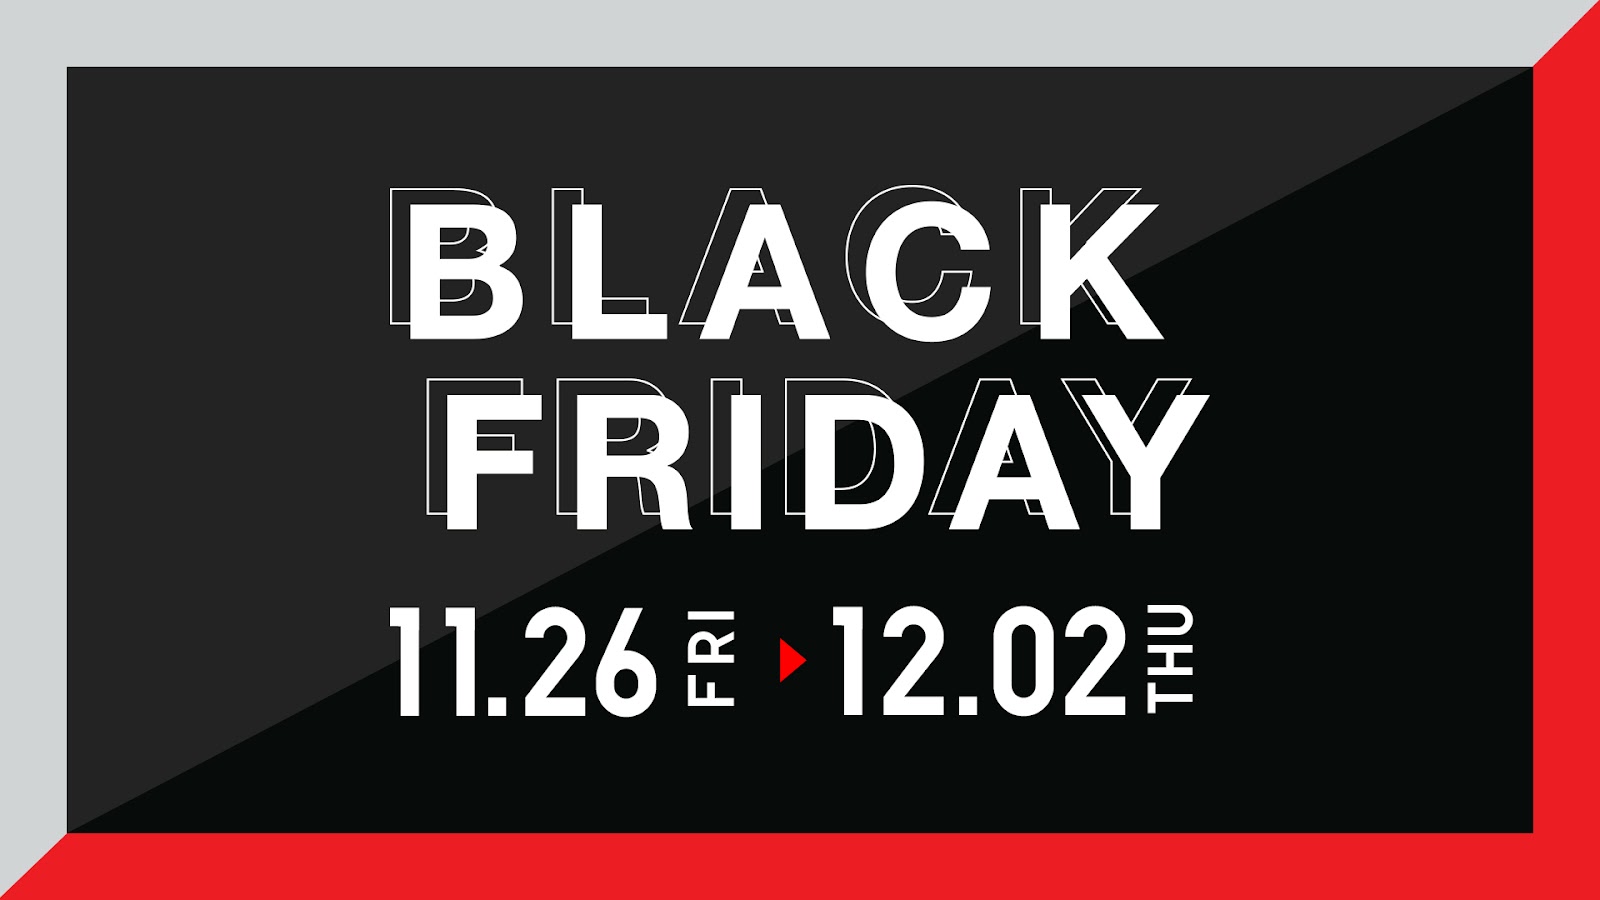 Get your holiday shopping done with UNIQLO’s Black Friday and Cyber Monday Sales